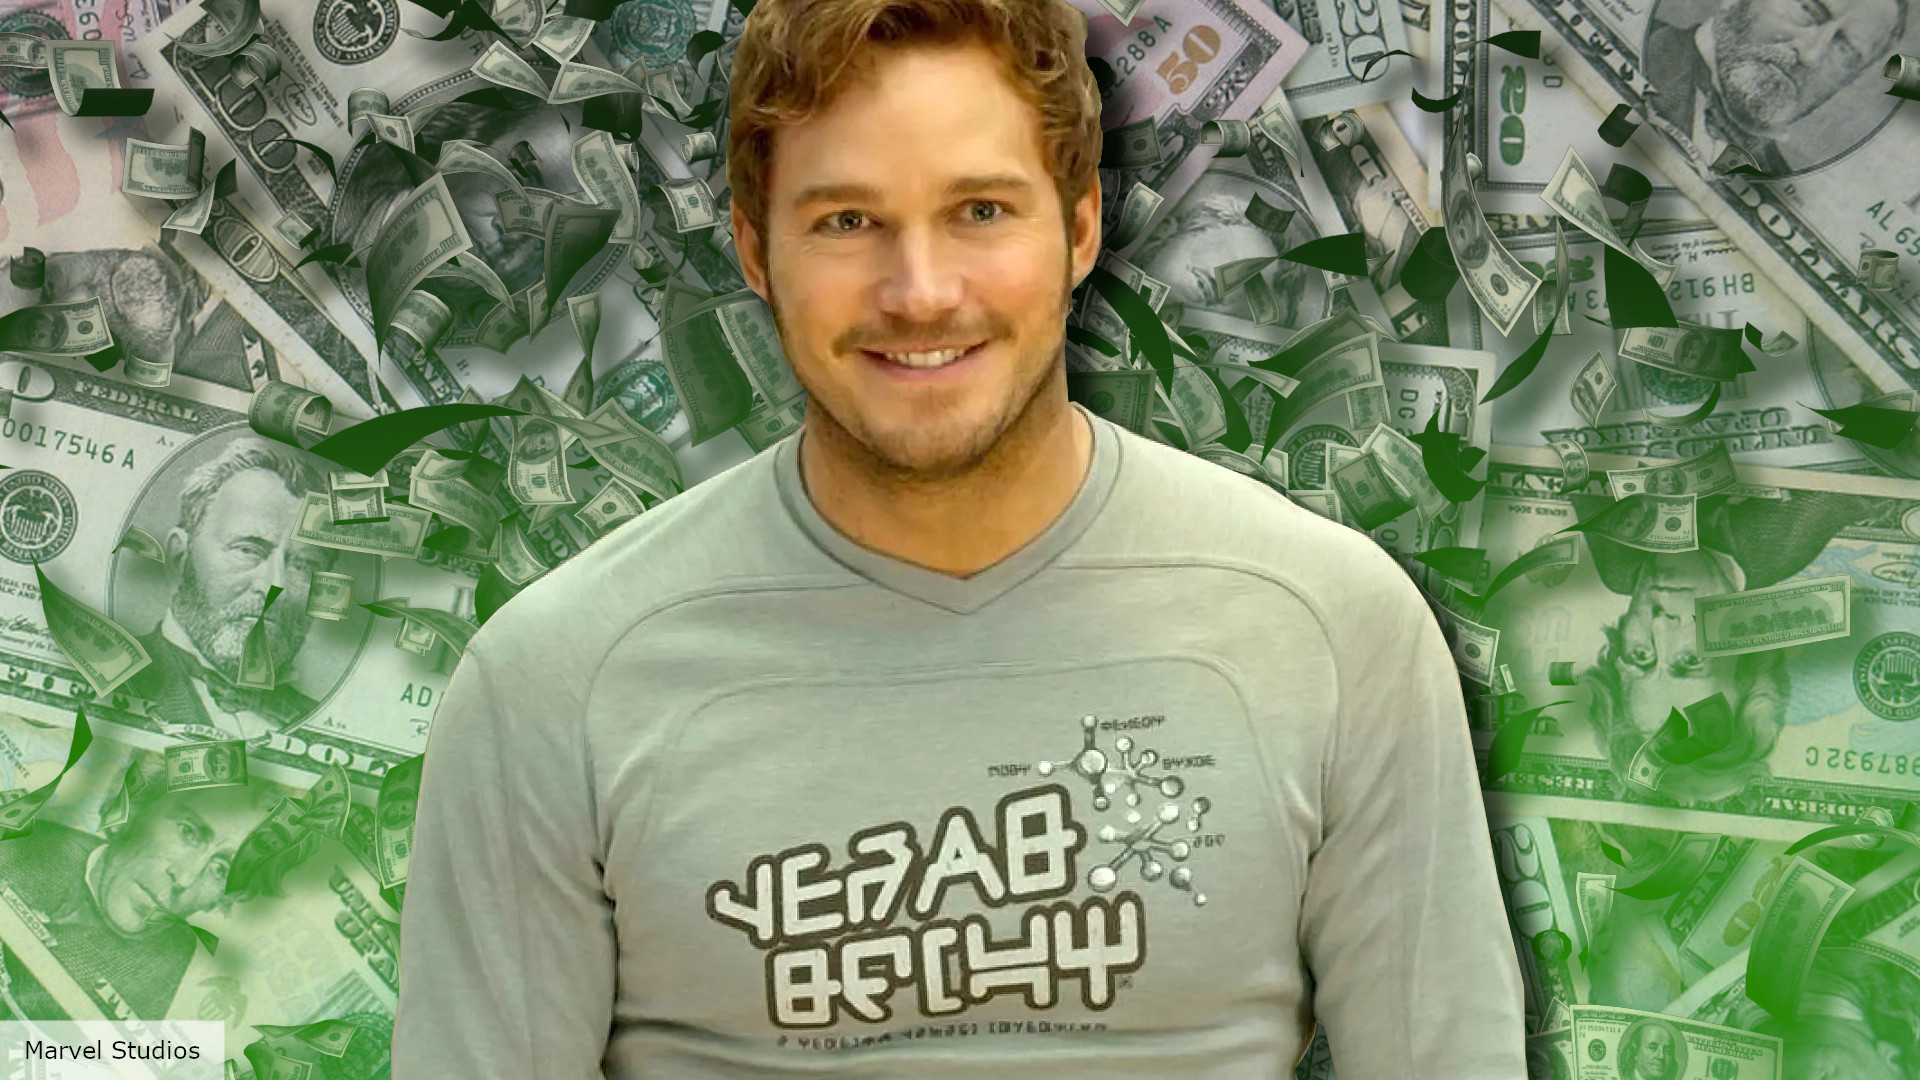 Chris Pratt Worth: How He Makes and Spends His Millions